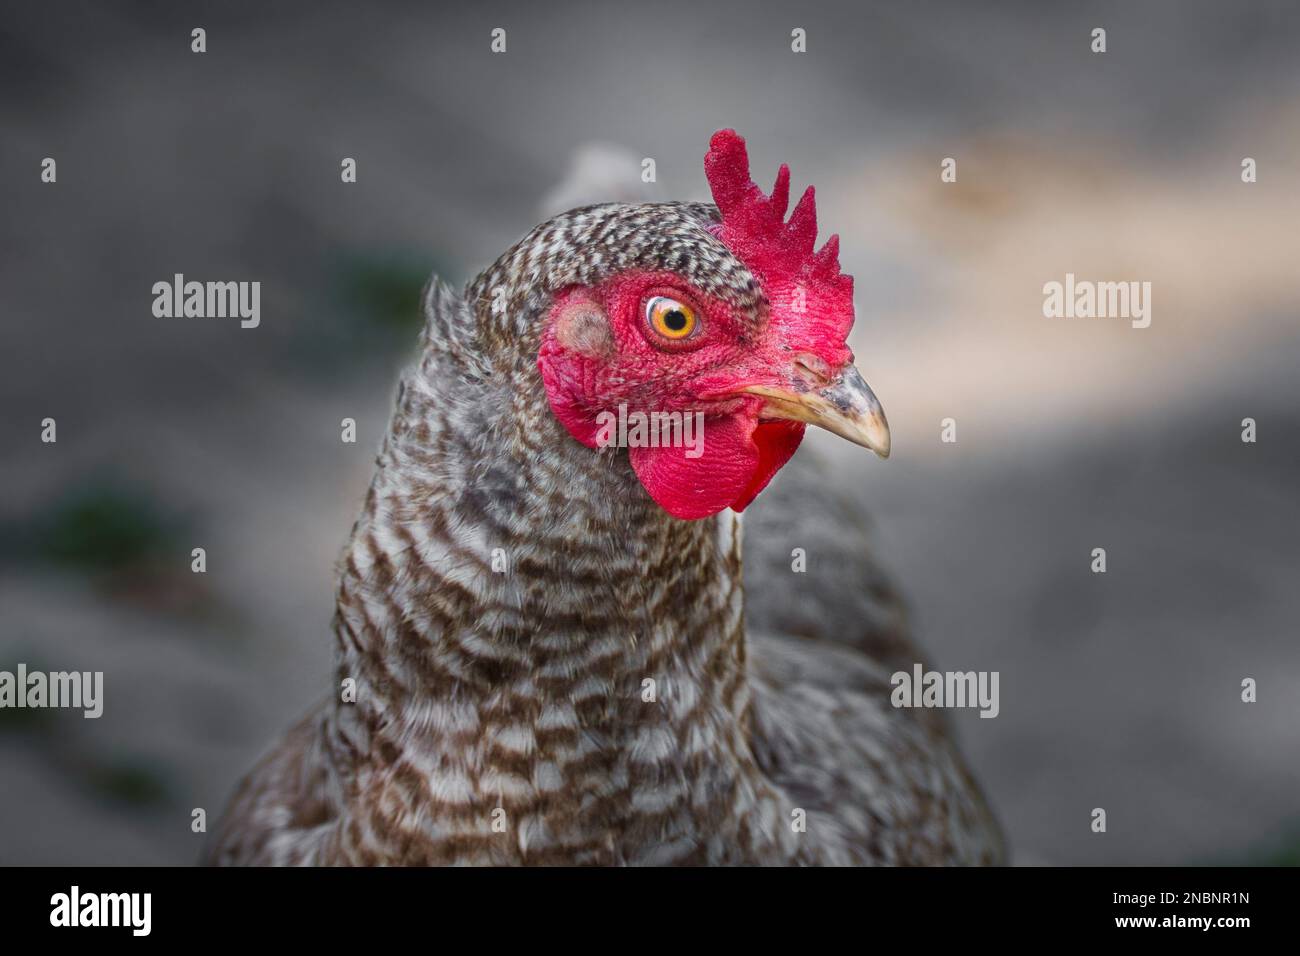 Portrait of a free running chicken with a black and white barred plumage (Blauer Sperber). Stock Photo